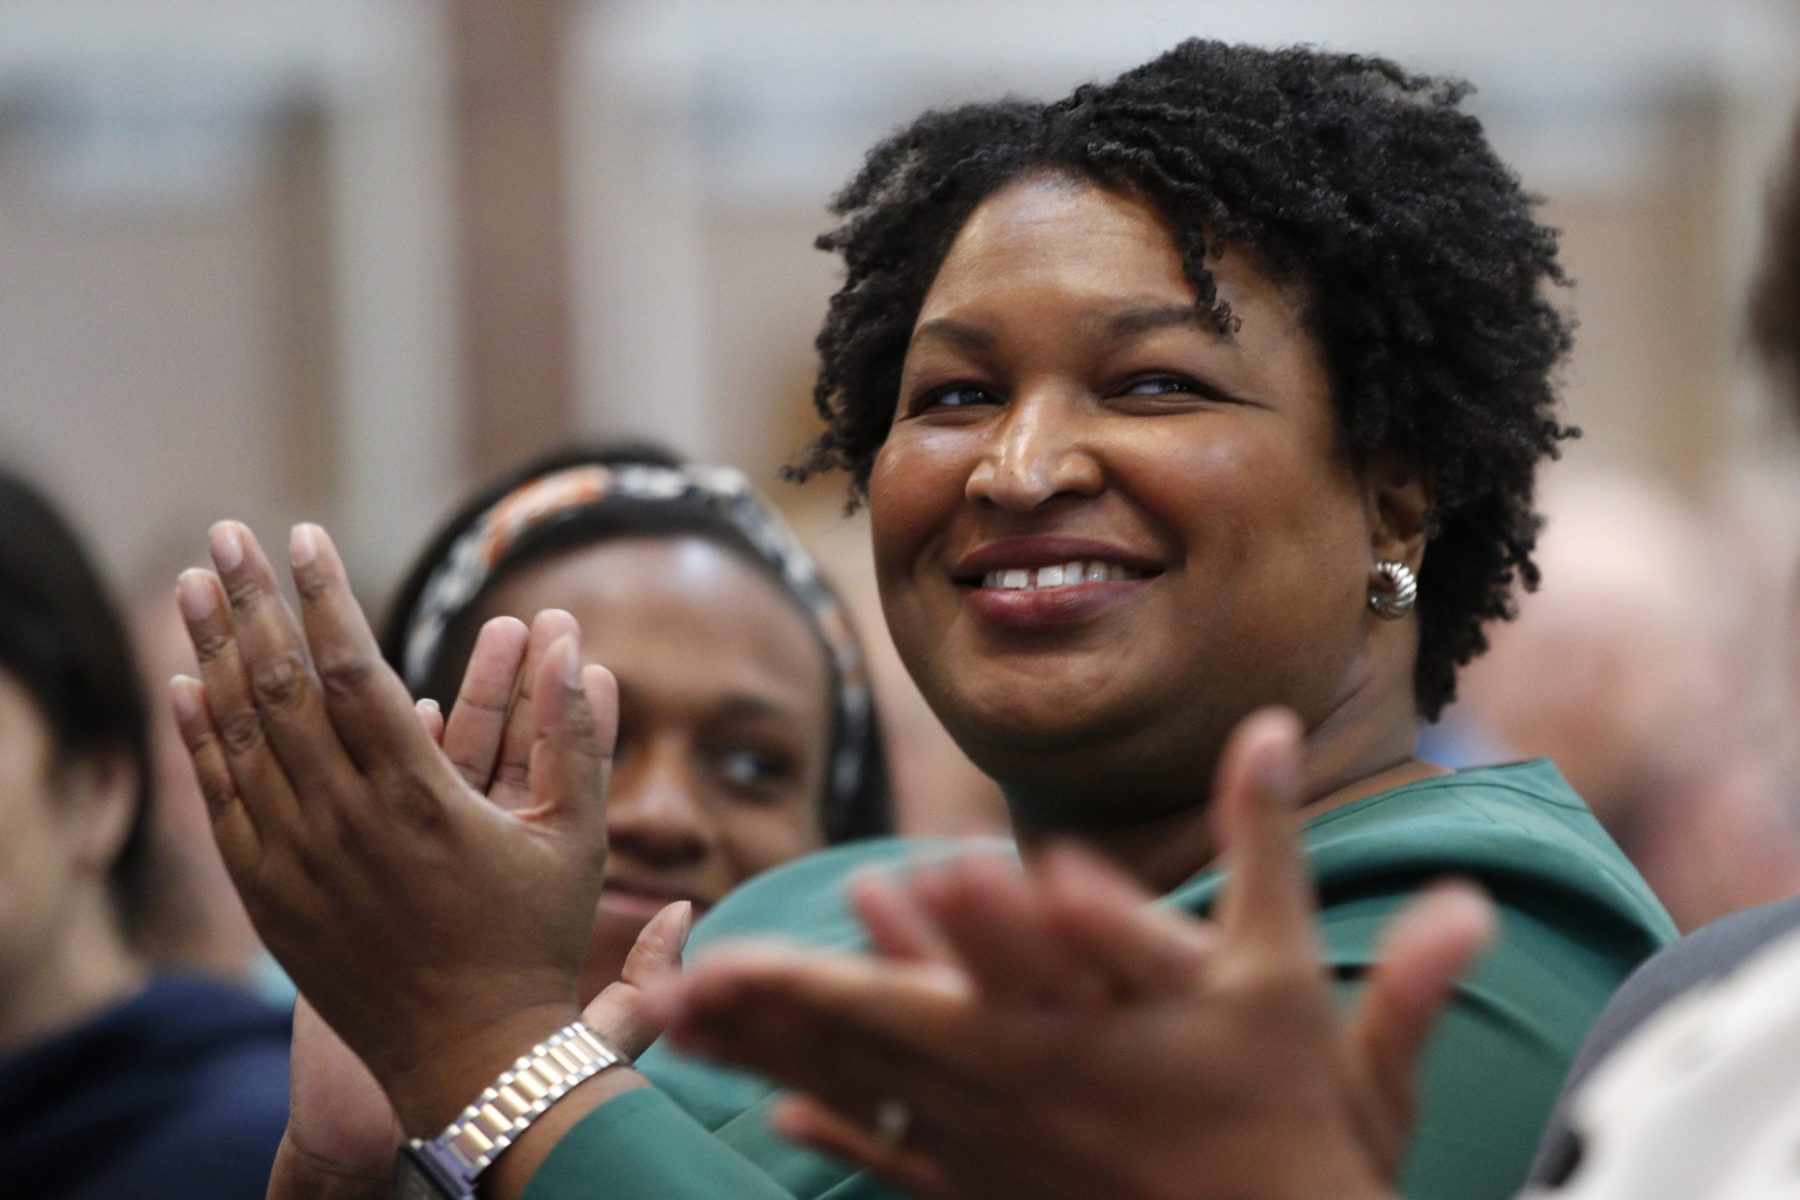 Stacey Abrams clapping in a crowd of people.